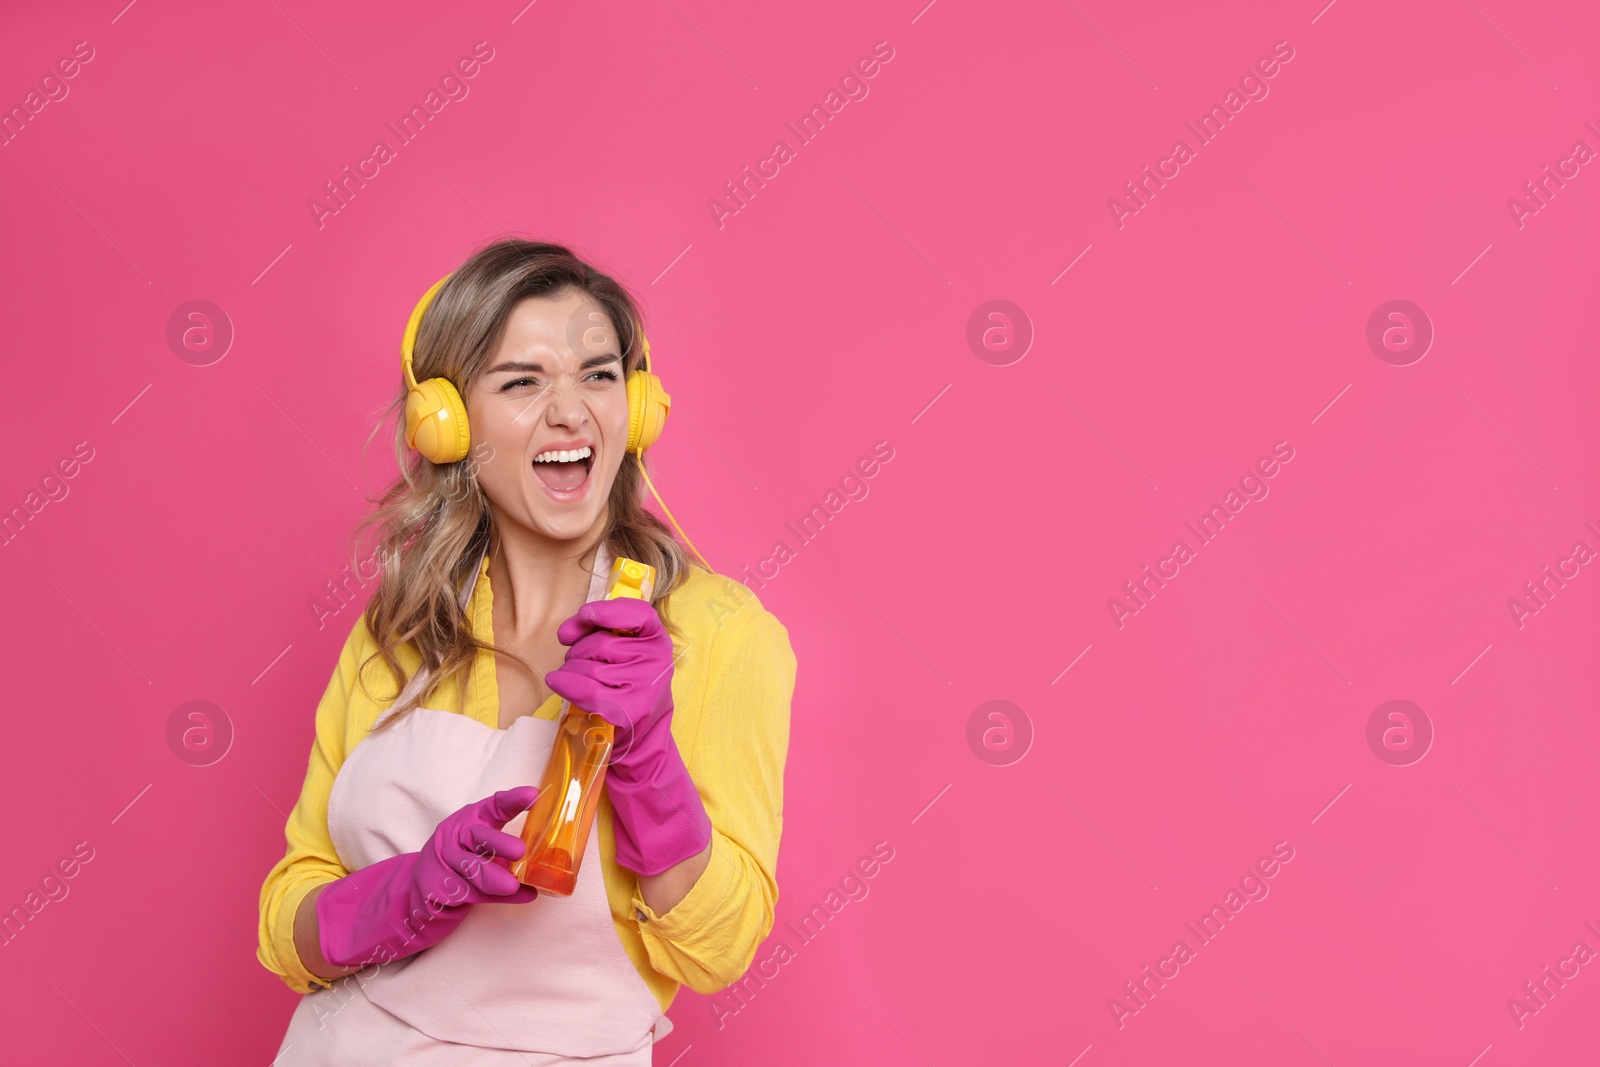 Photo of Beautiful young woman with headphones and bottle of detergent singing on pink background. Space for text